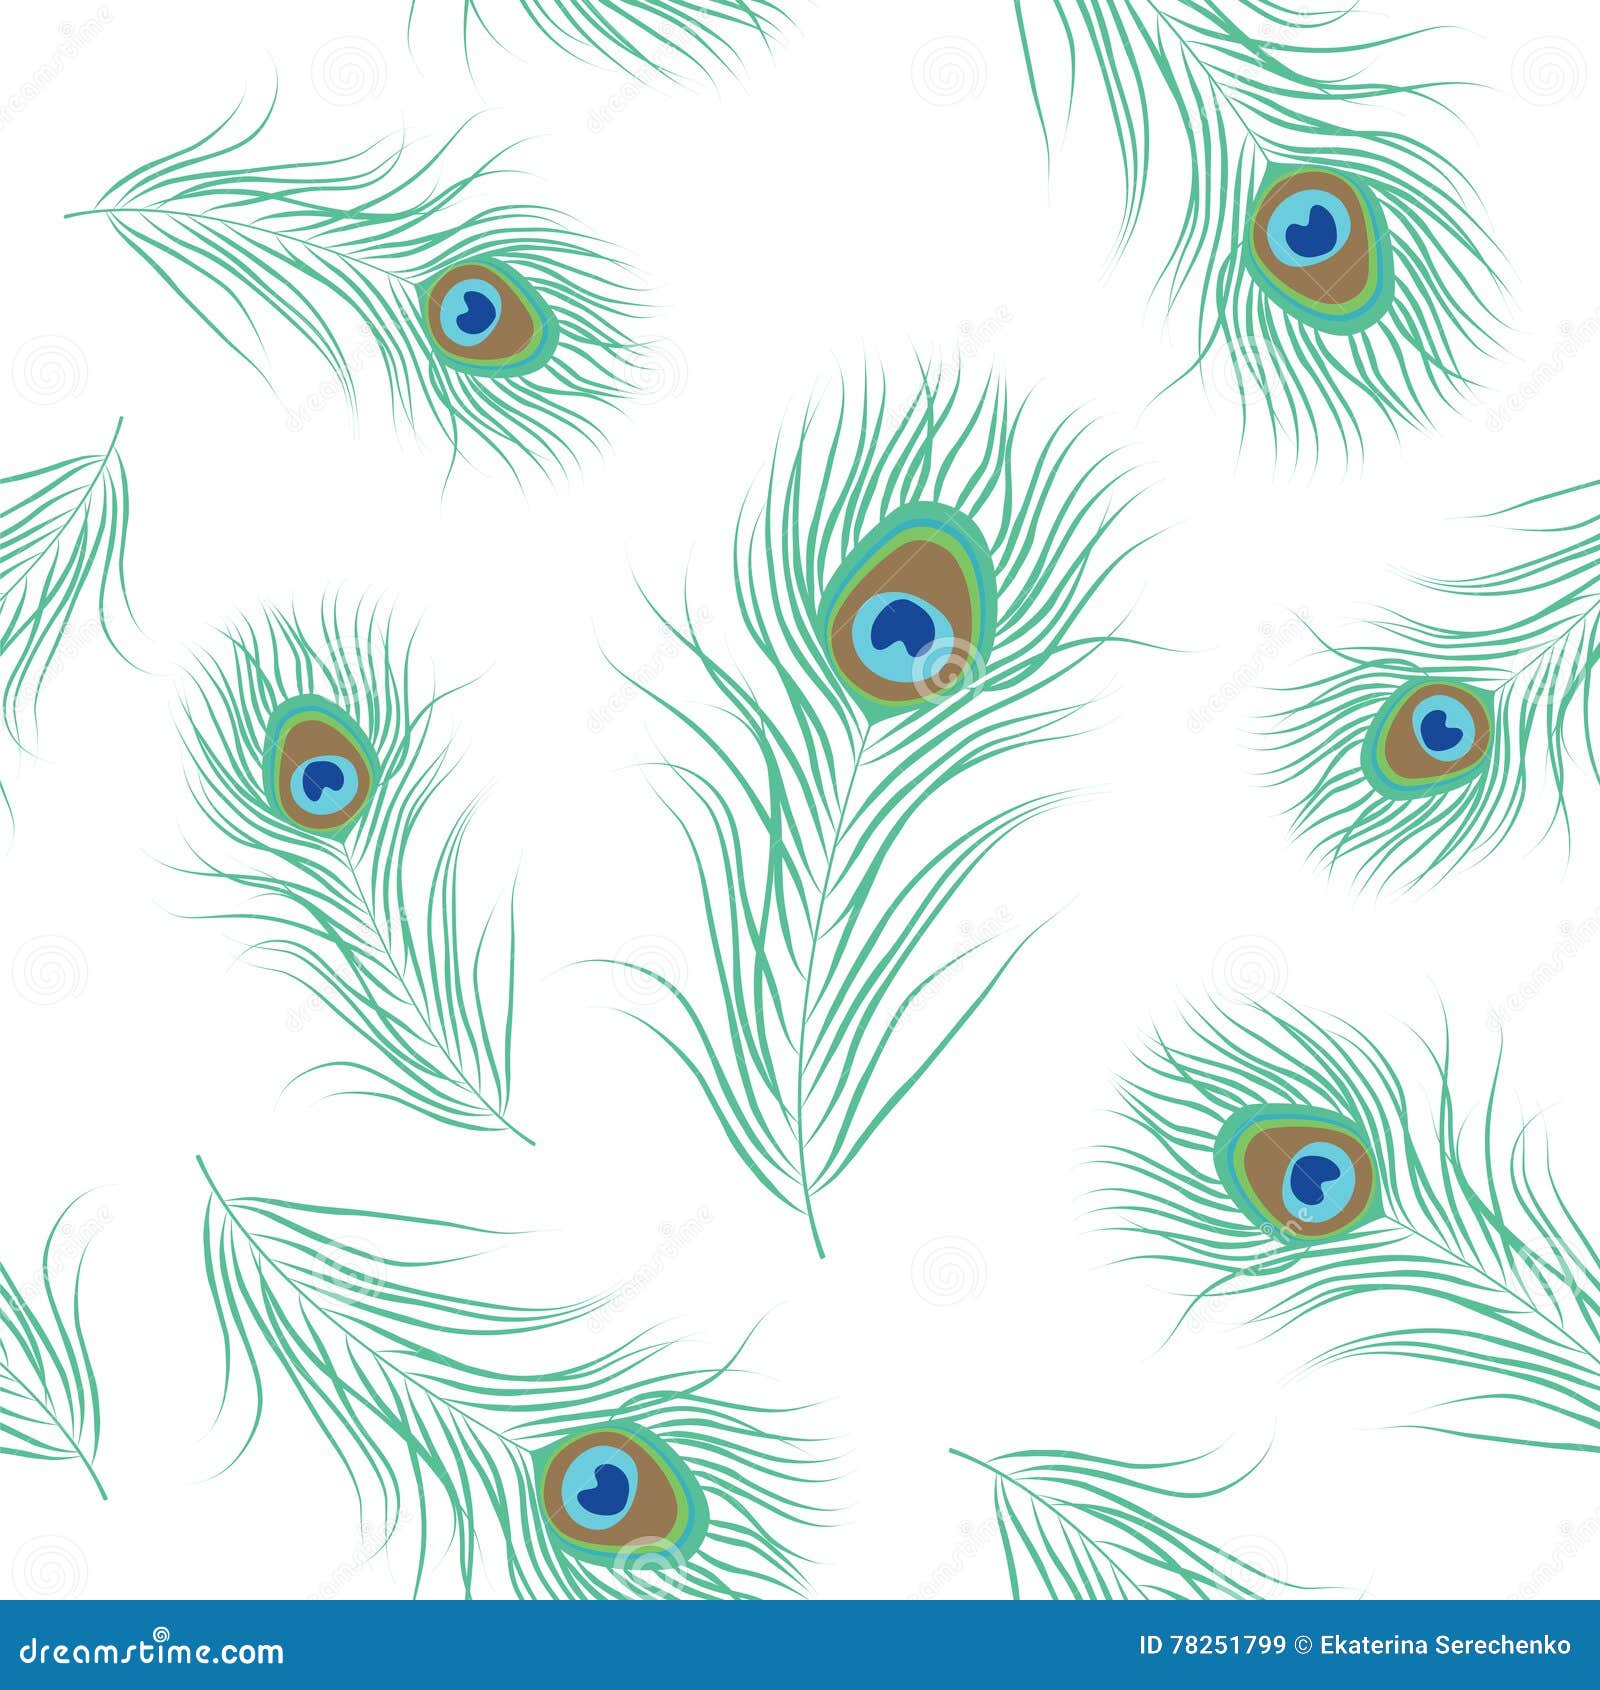 peacock feather seamless pattern